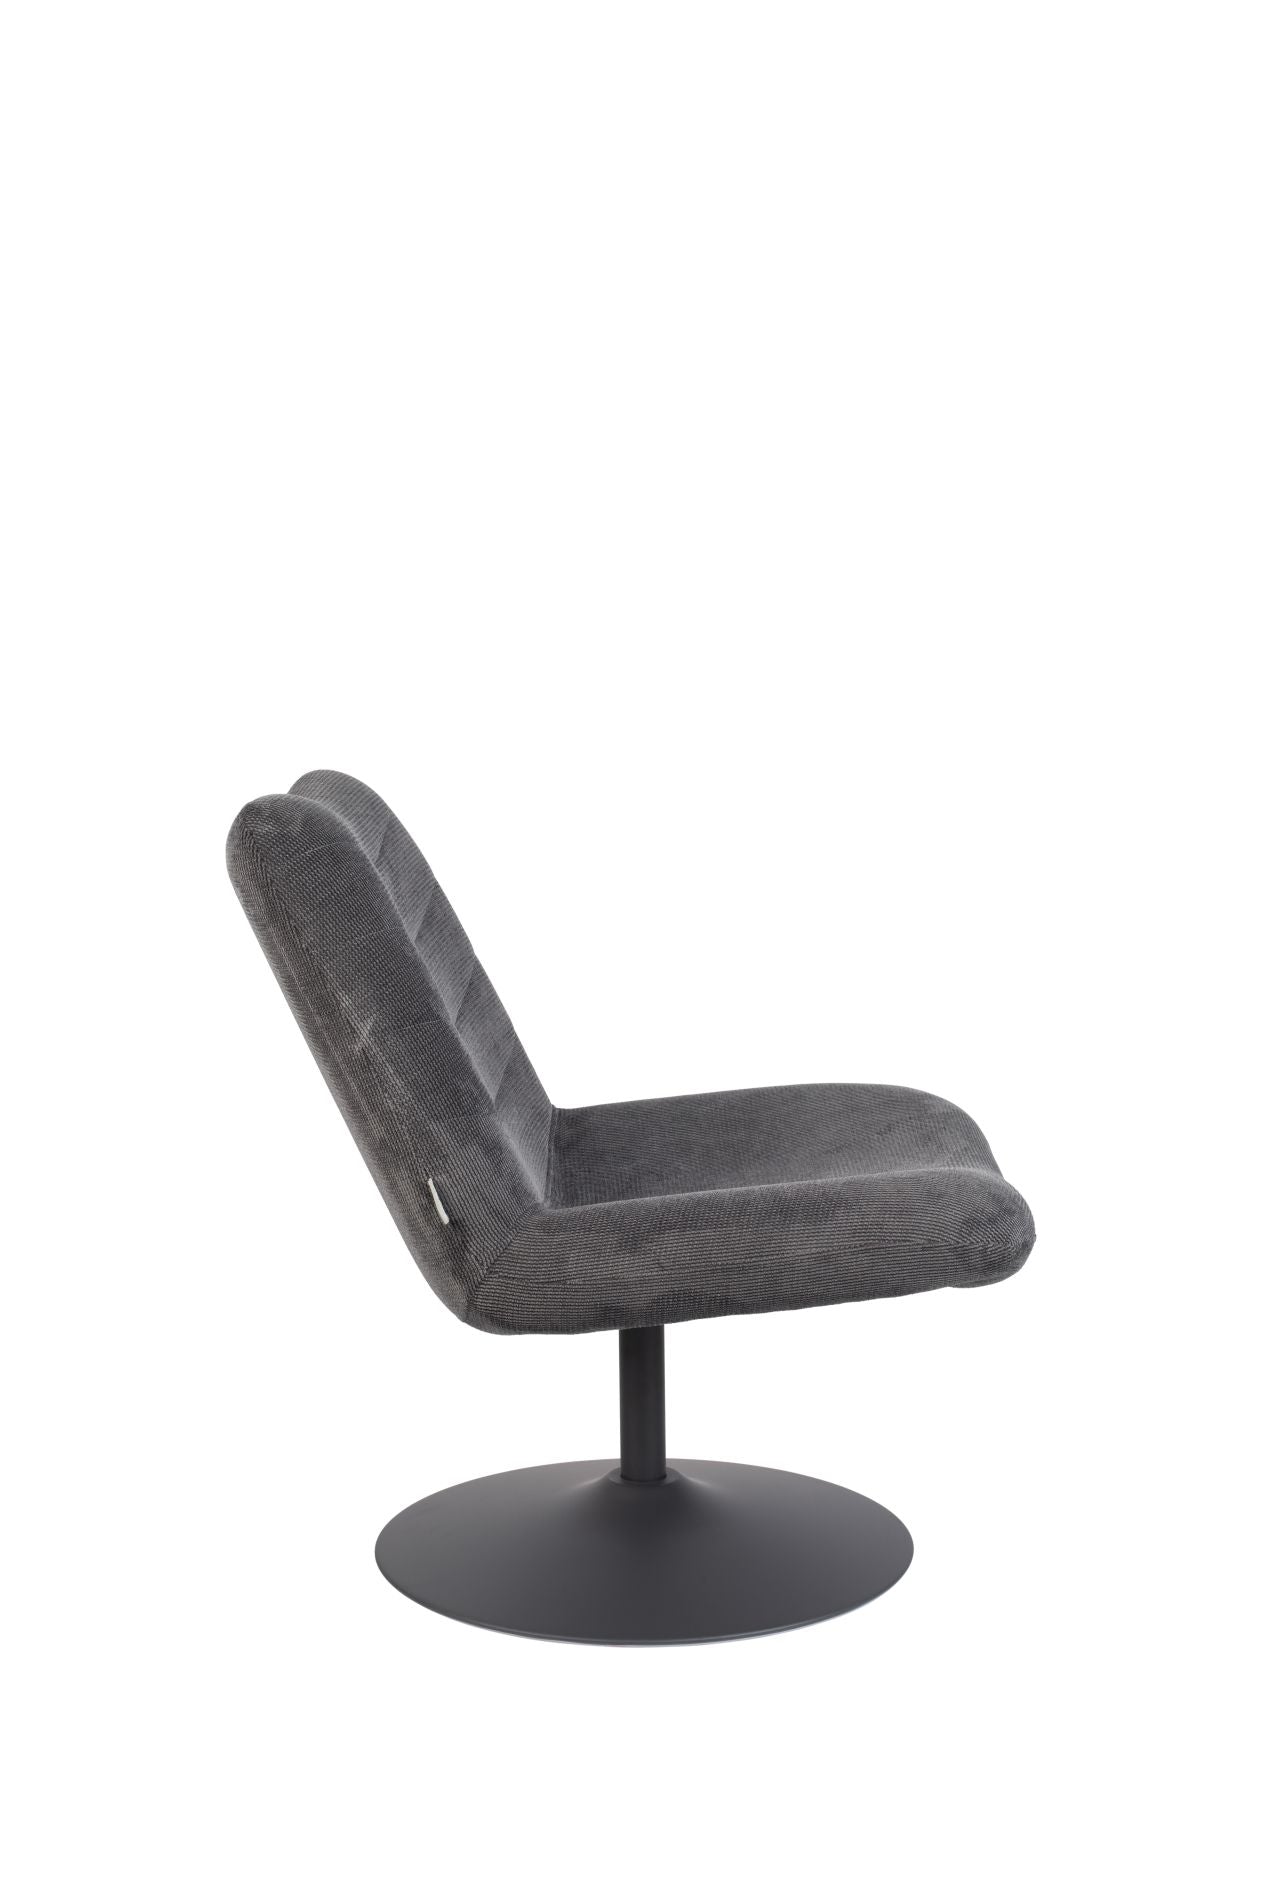 Zuiver Bubba fauteuil donkergrijs